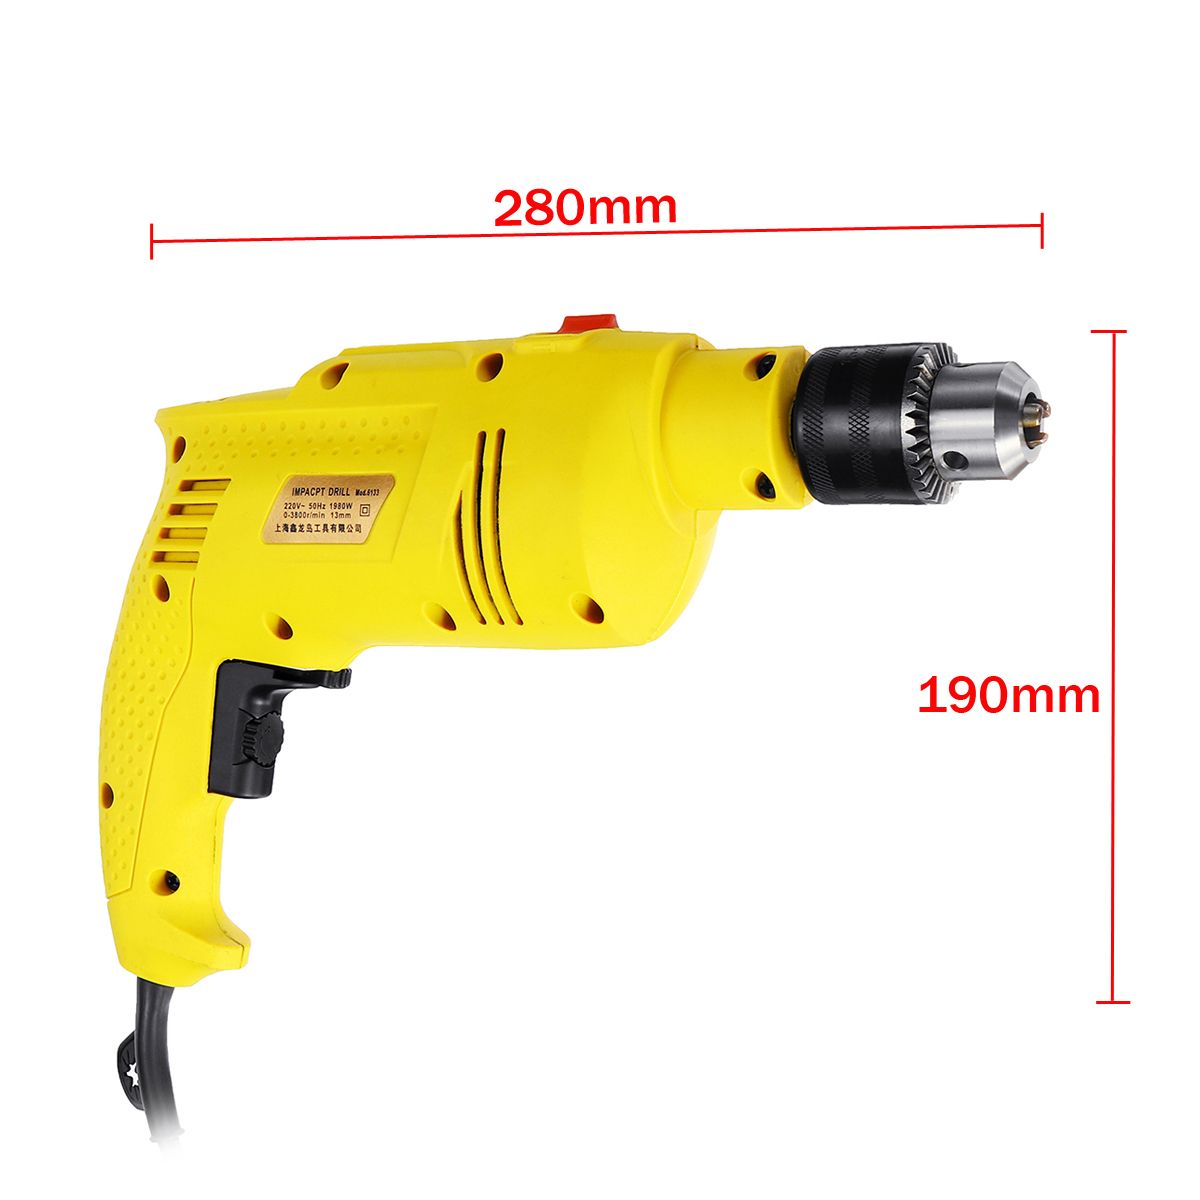 1980W-3800rpm-Electric-Impact-Drill-0-3800rmin-Electric-Drill-Five-Axes-Linkage-Power-Drills-Powerfu-1468497